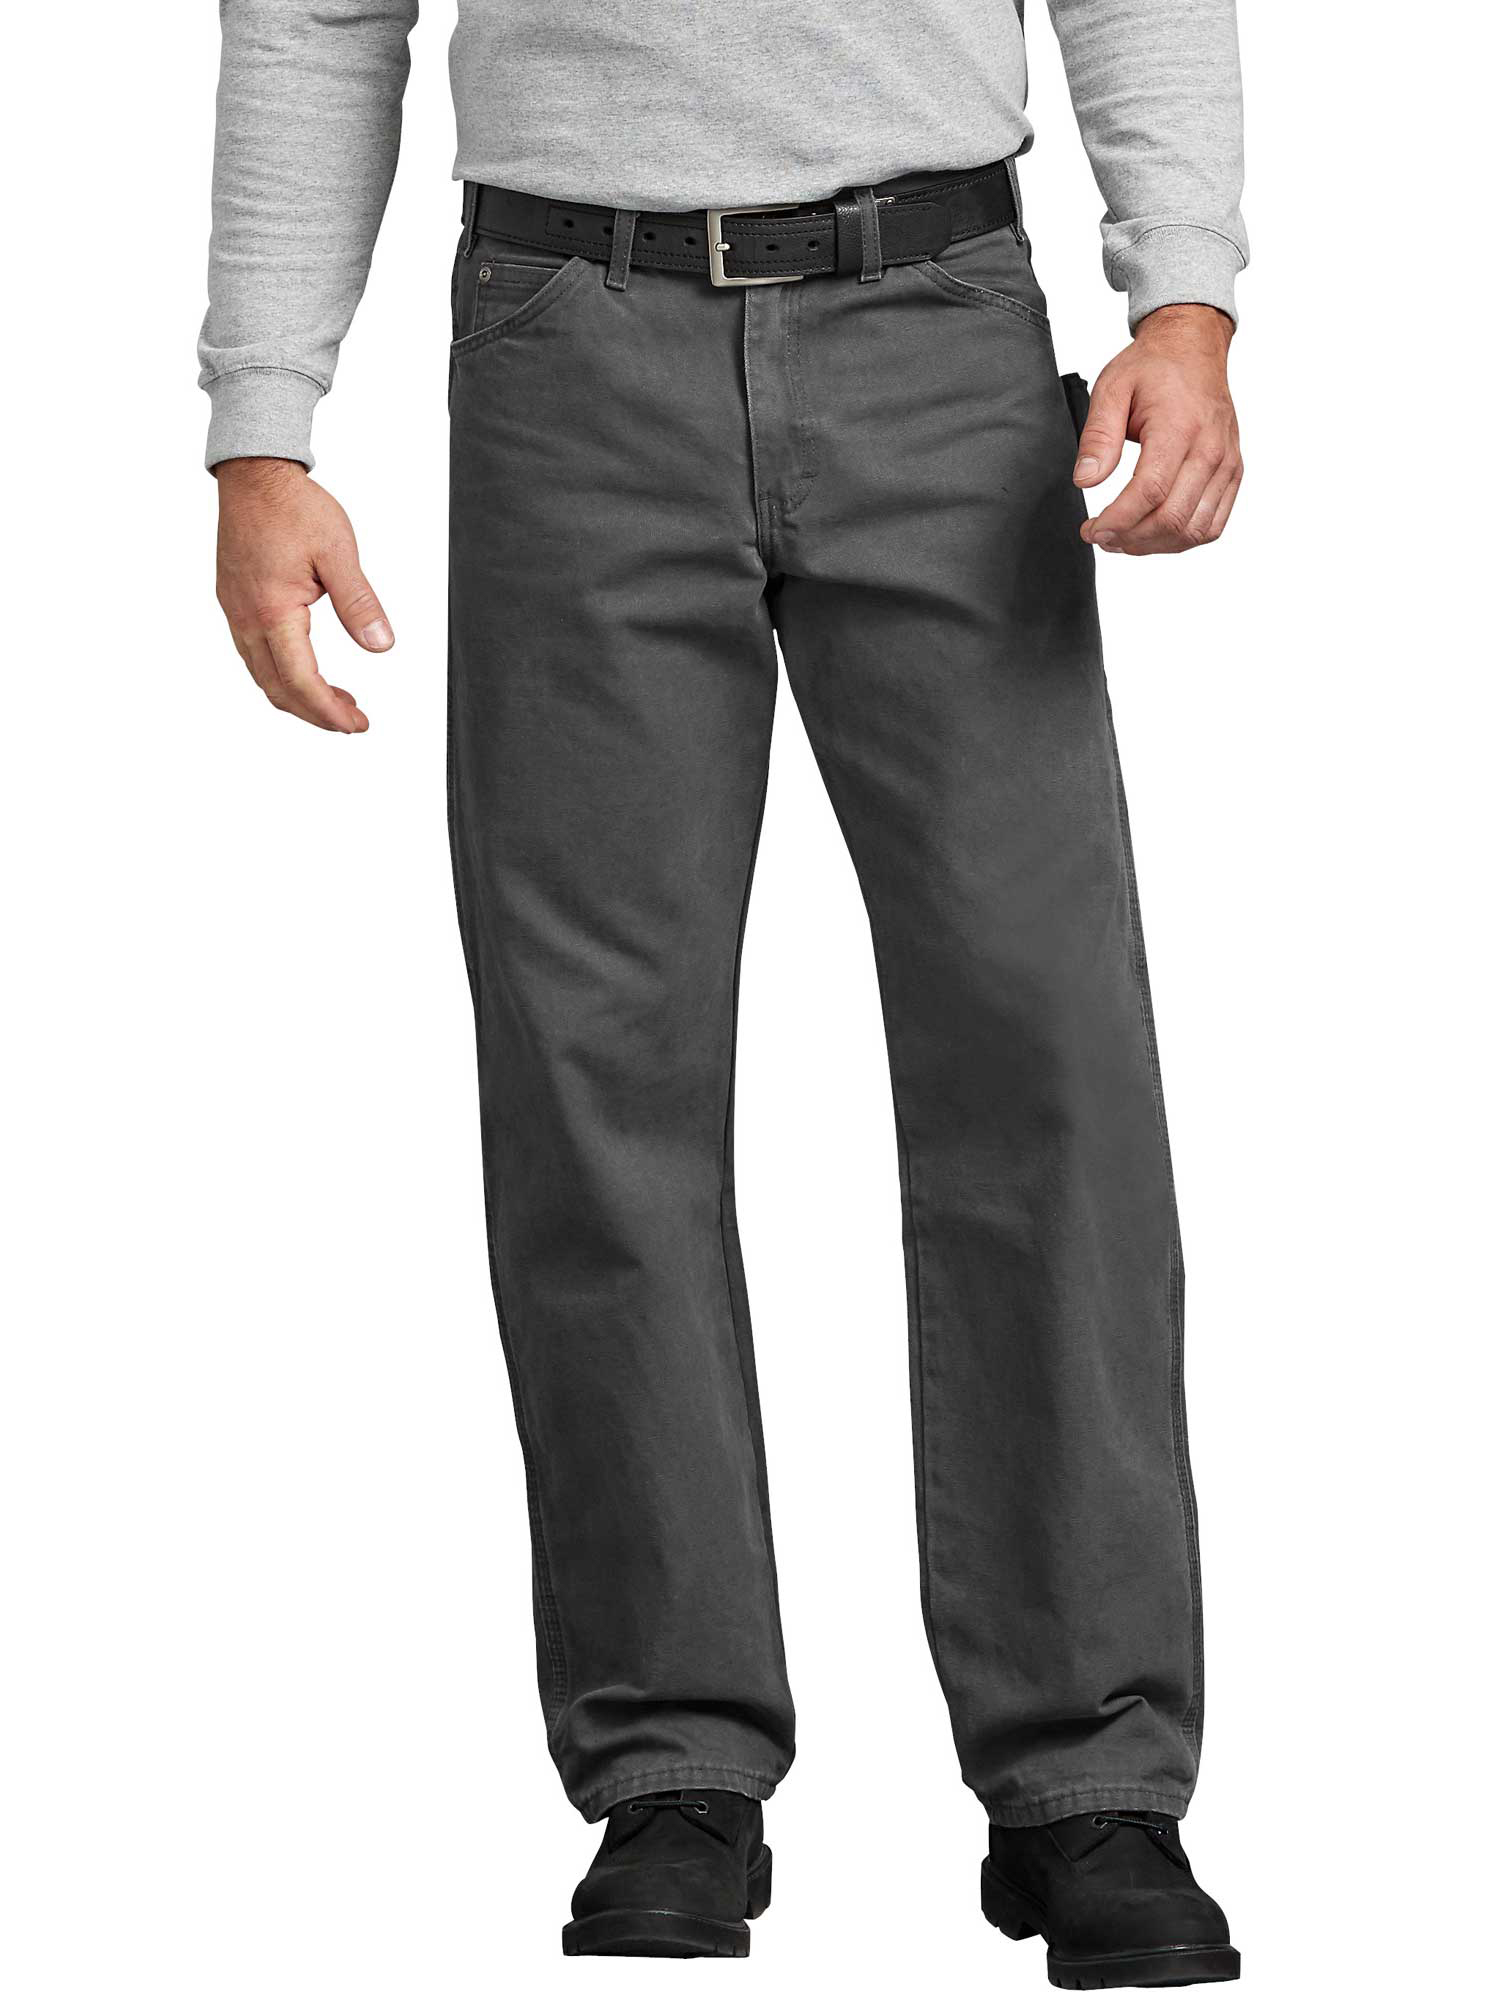 Dickies Mens and Big Mens Relaxed Fit Straight Leg Carpenter Duck Jeans - image 1 of 2